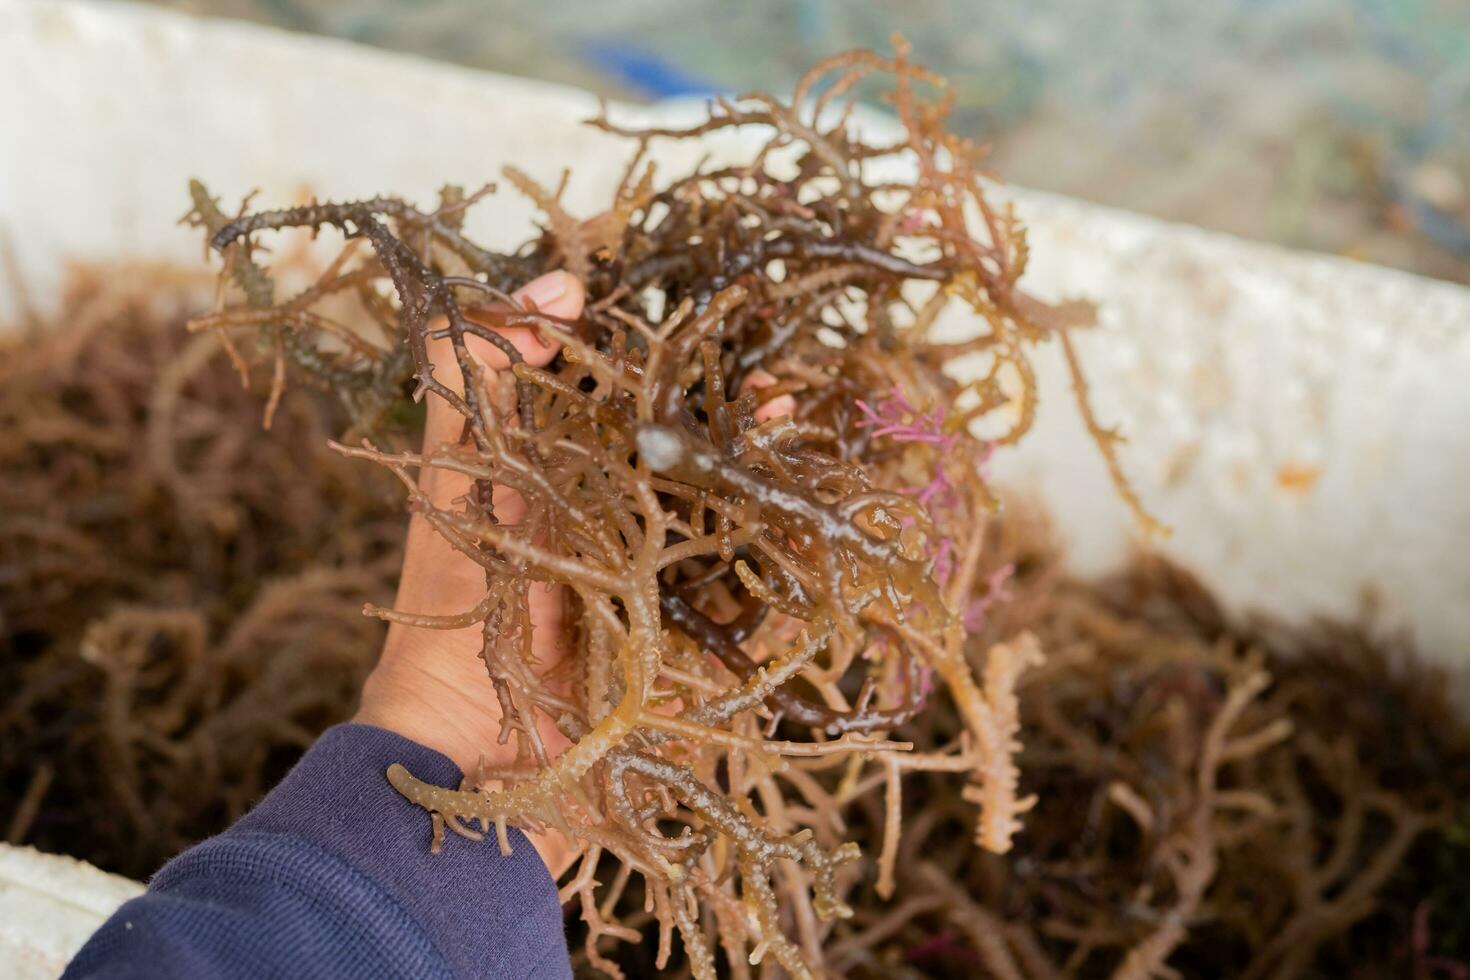 Freshly harvested seaweed. Gigartina pistillata is an edible red seaweed from the Gigartina family photo